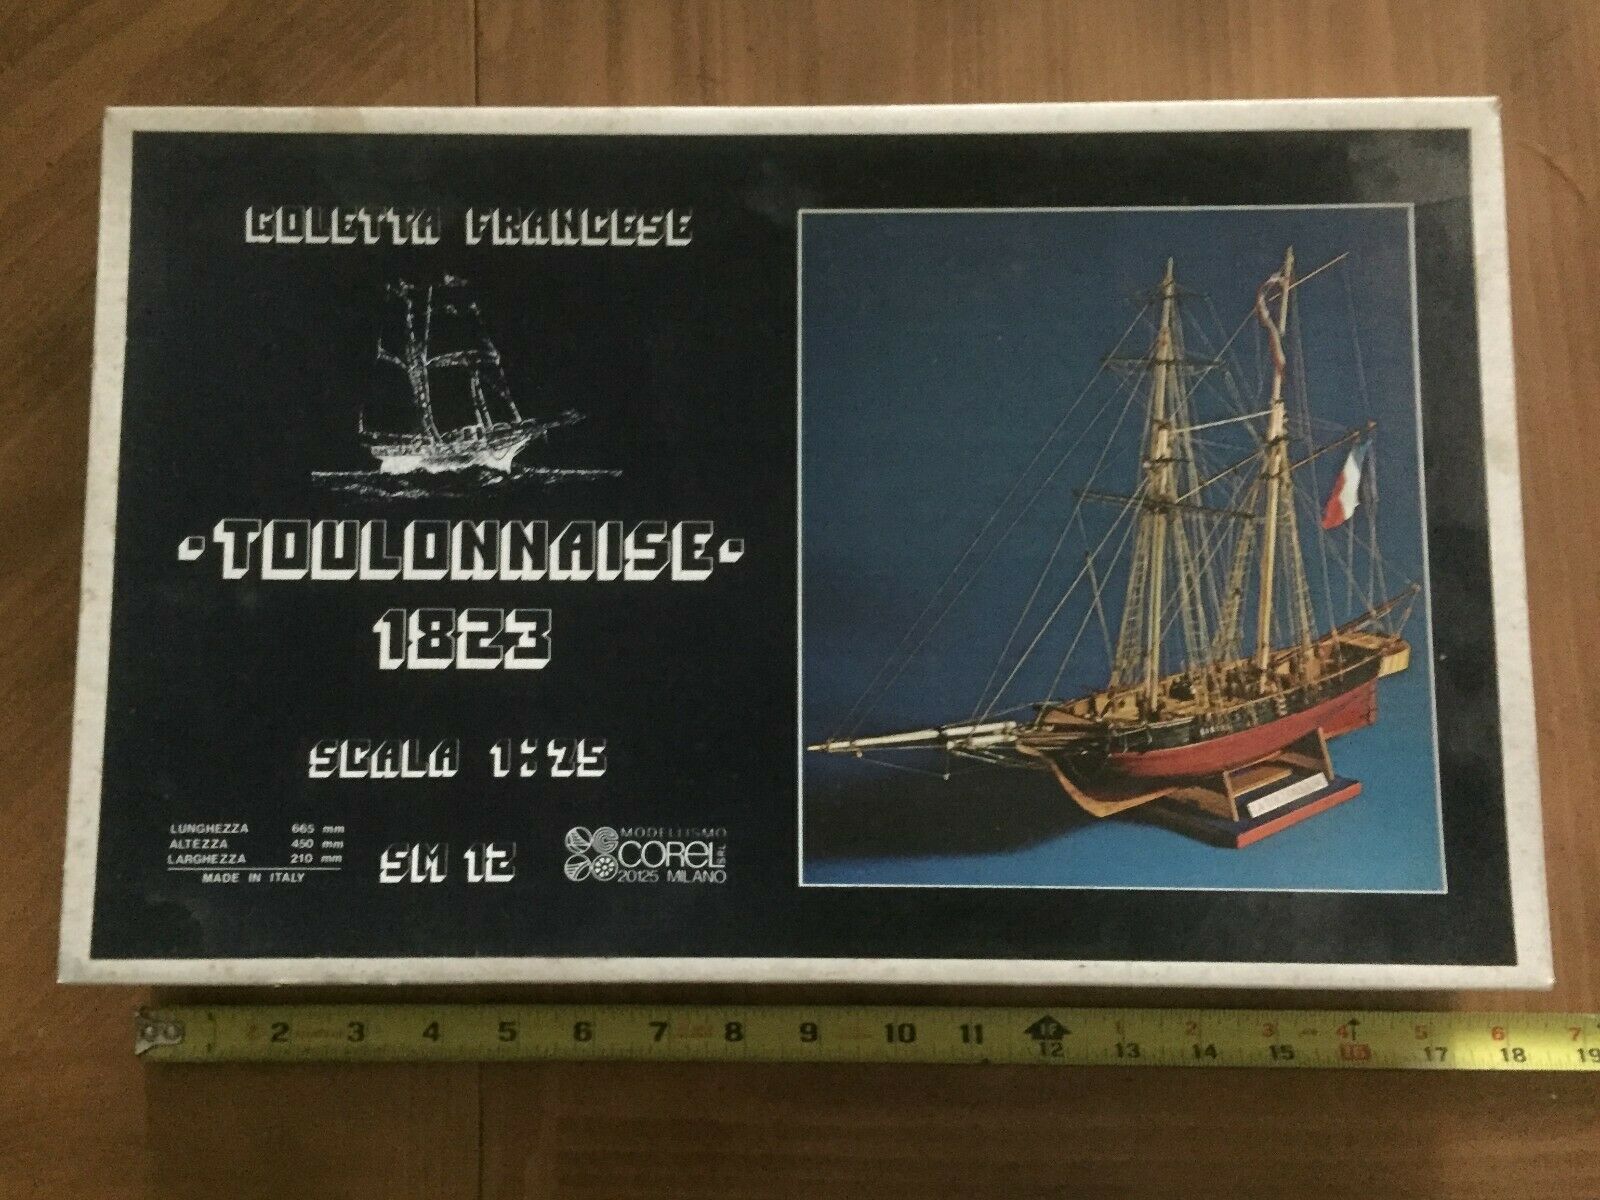 Corel Toulonnaise Ship Model, 1:75 Scale, Made In Italy, New In Box